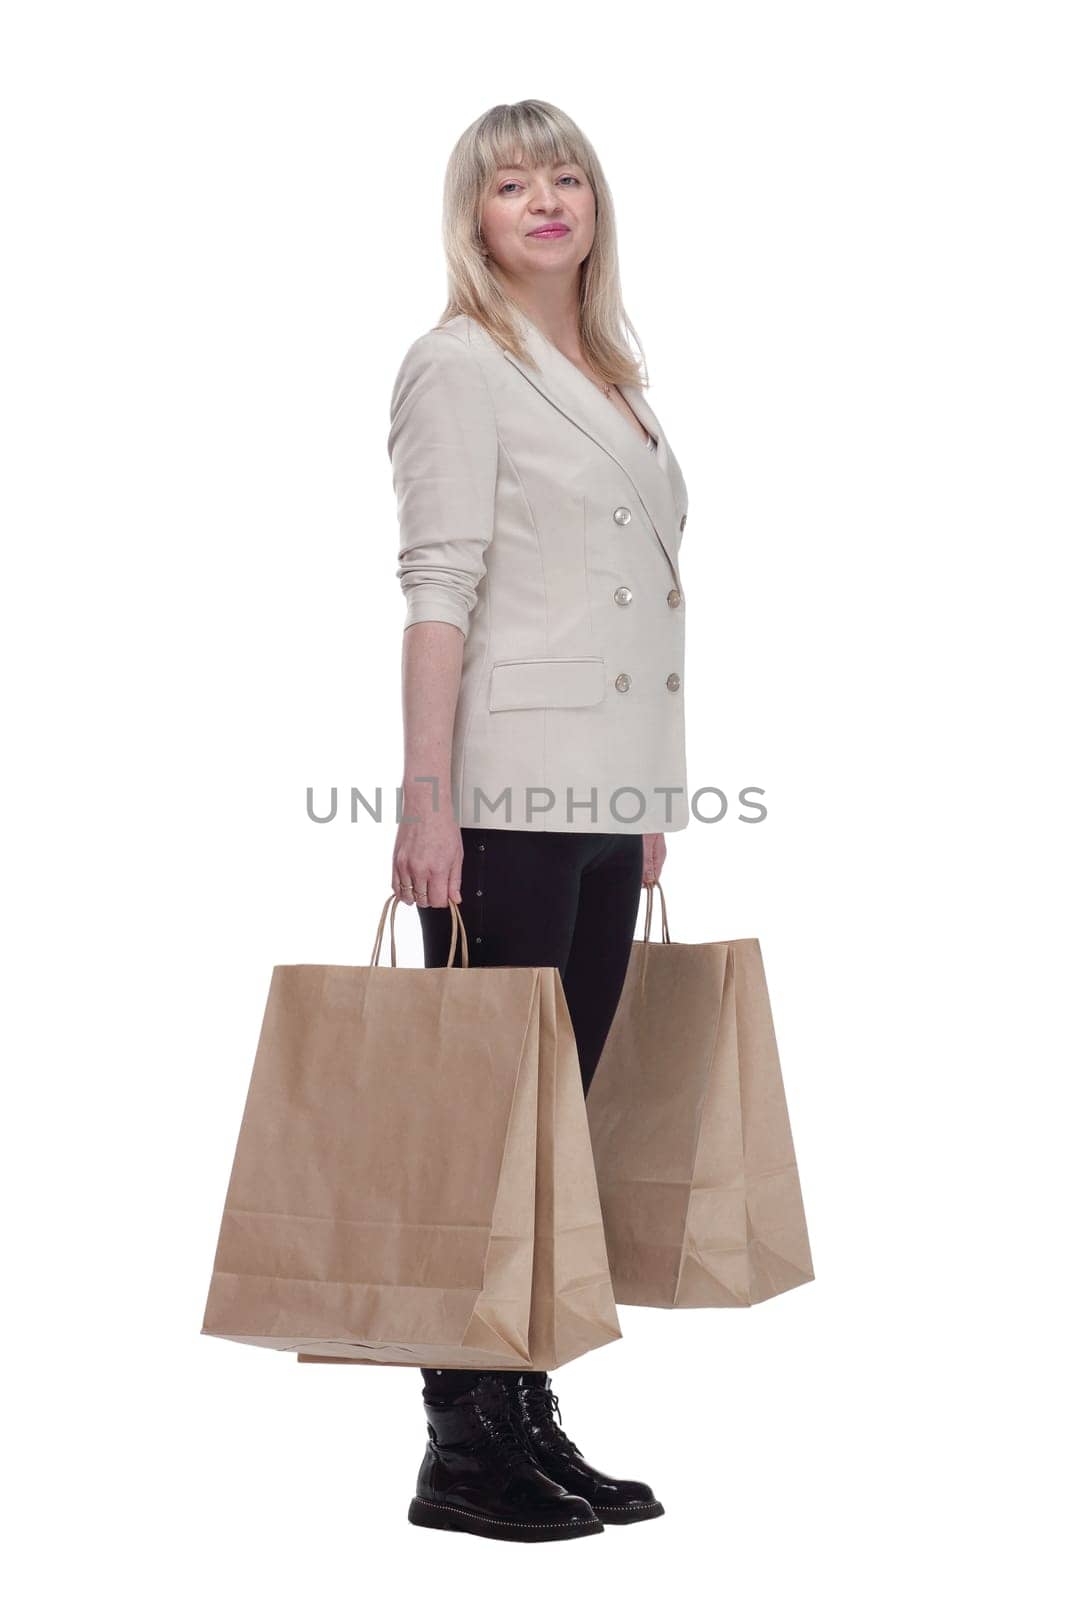 in full growth. smiling blonde woman with shopping bags . isolated on a white background.